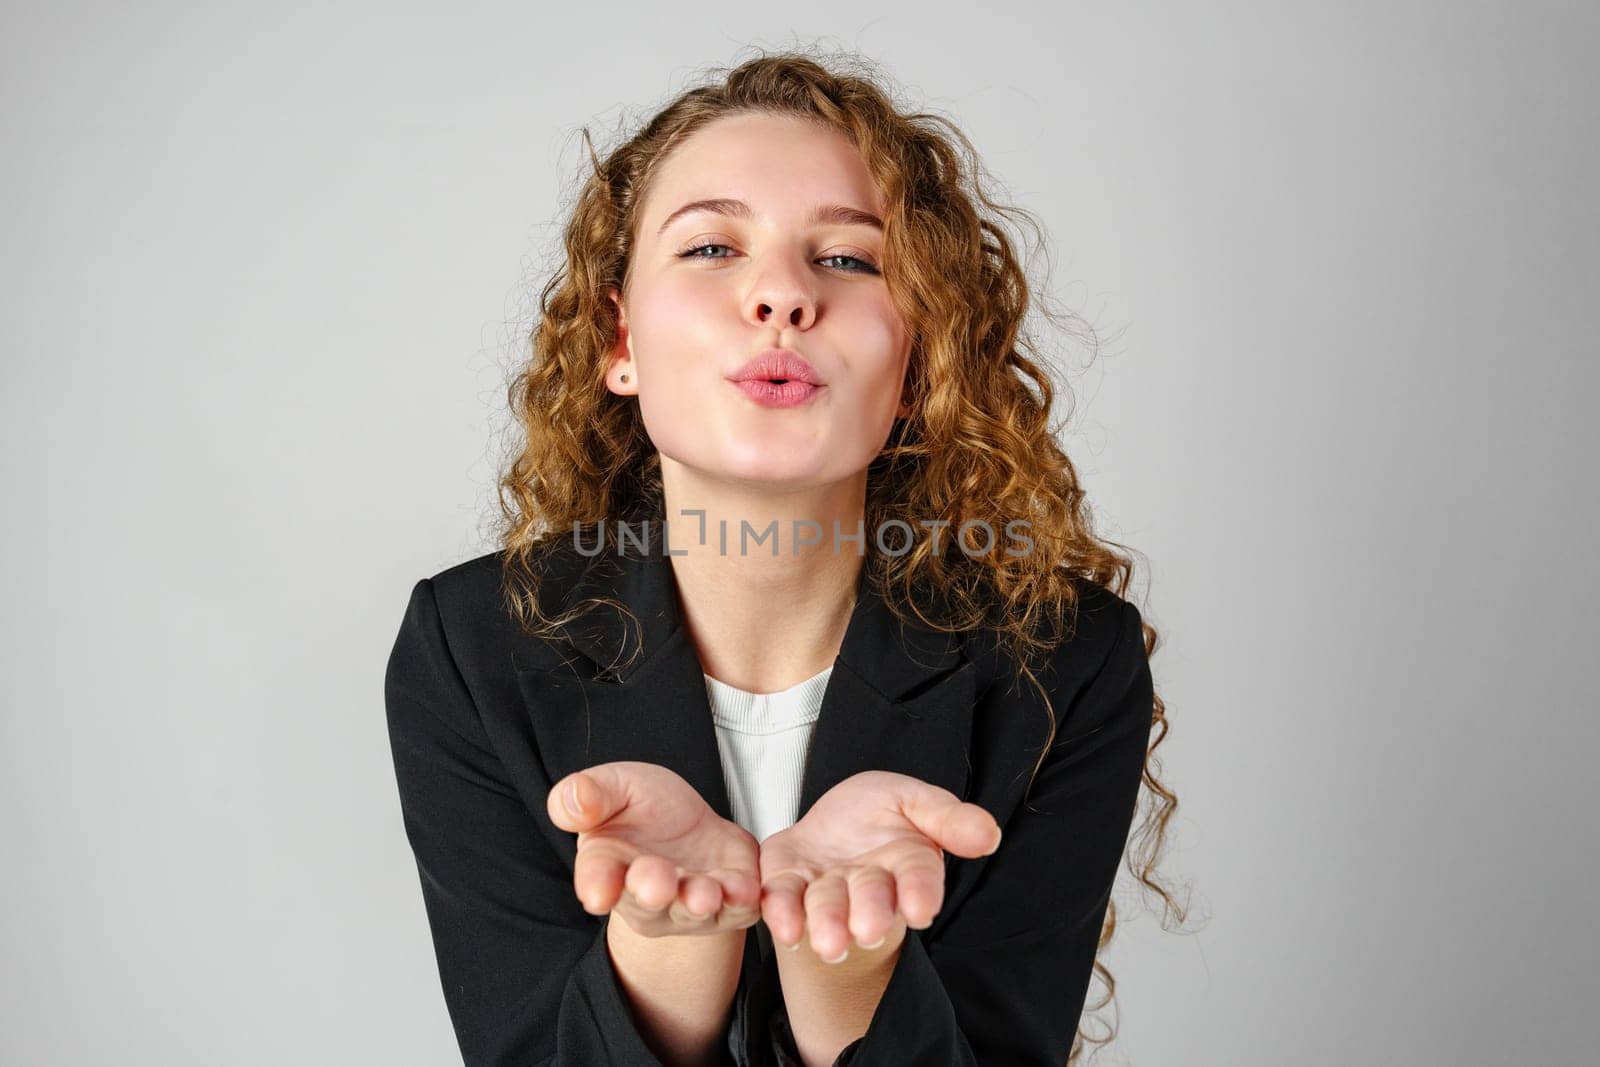 Young Woman Blowing a Kiss Towards the Camera in a Studio Setting by Fabrikasimf